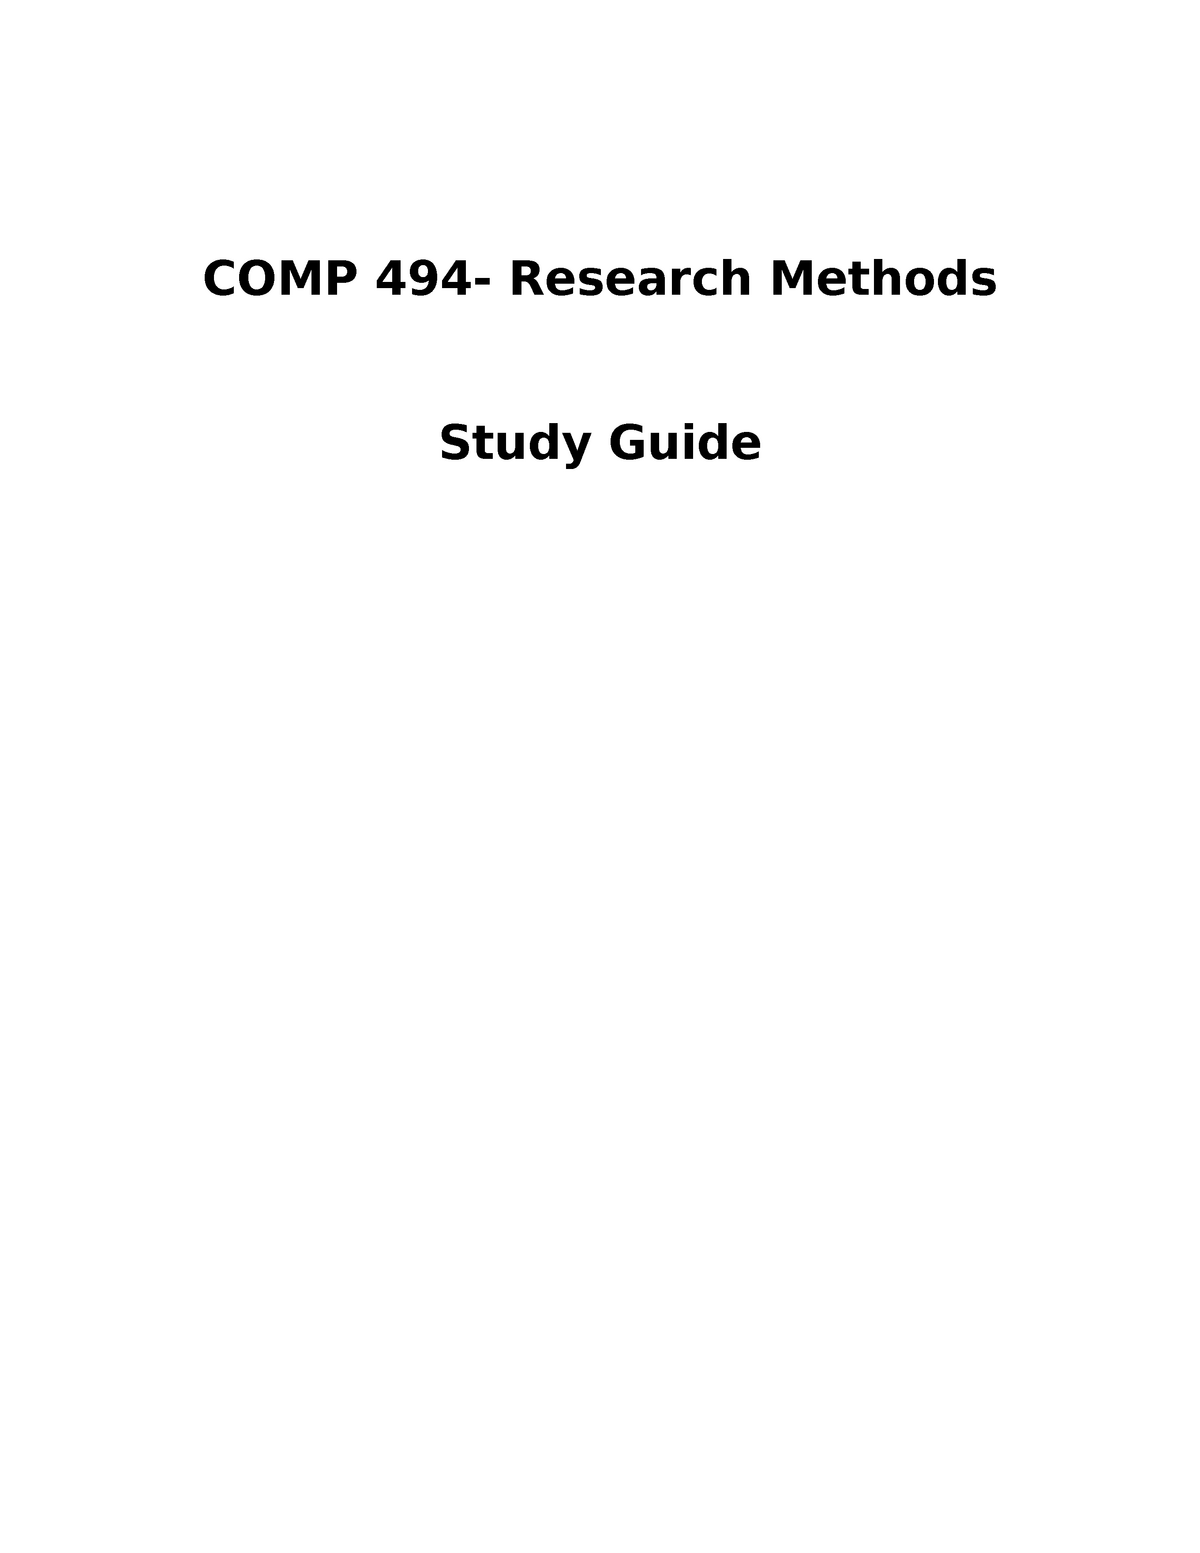 research methods study guide